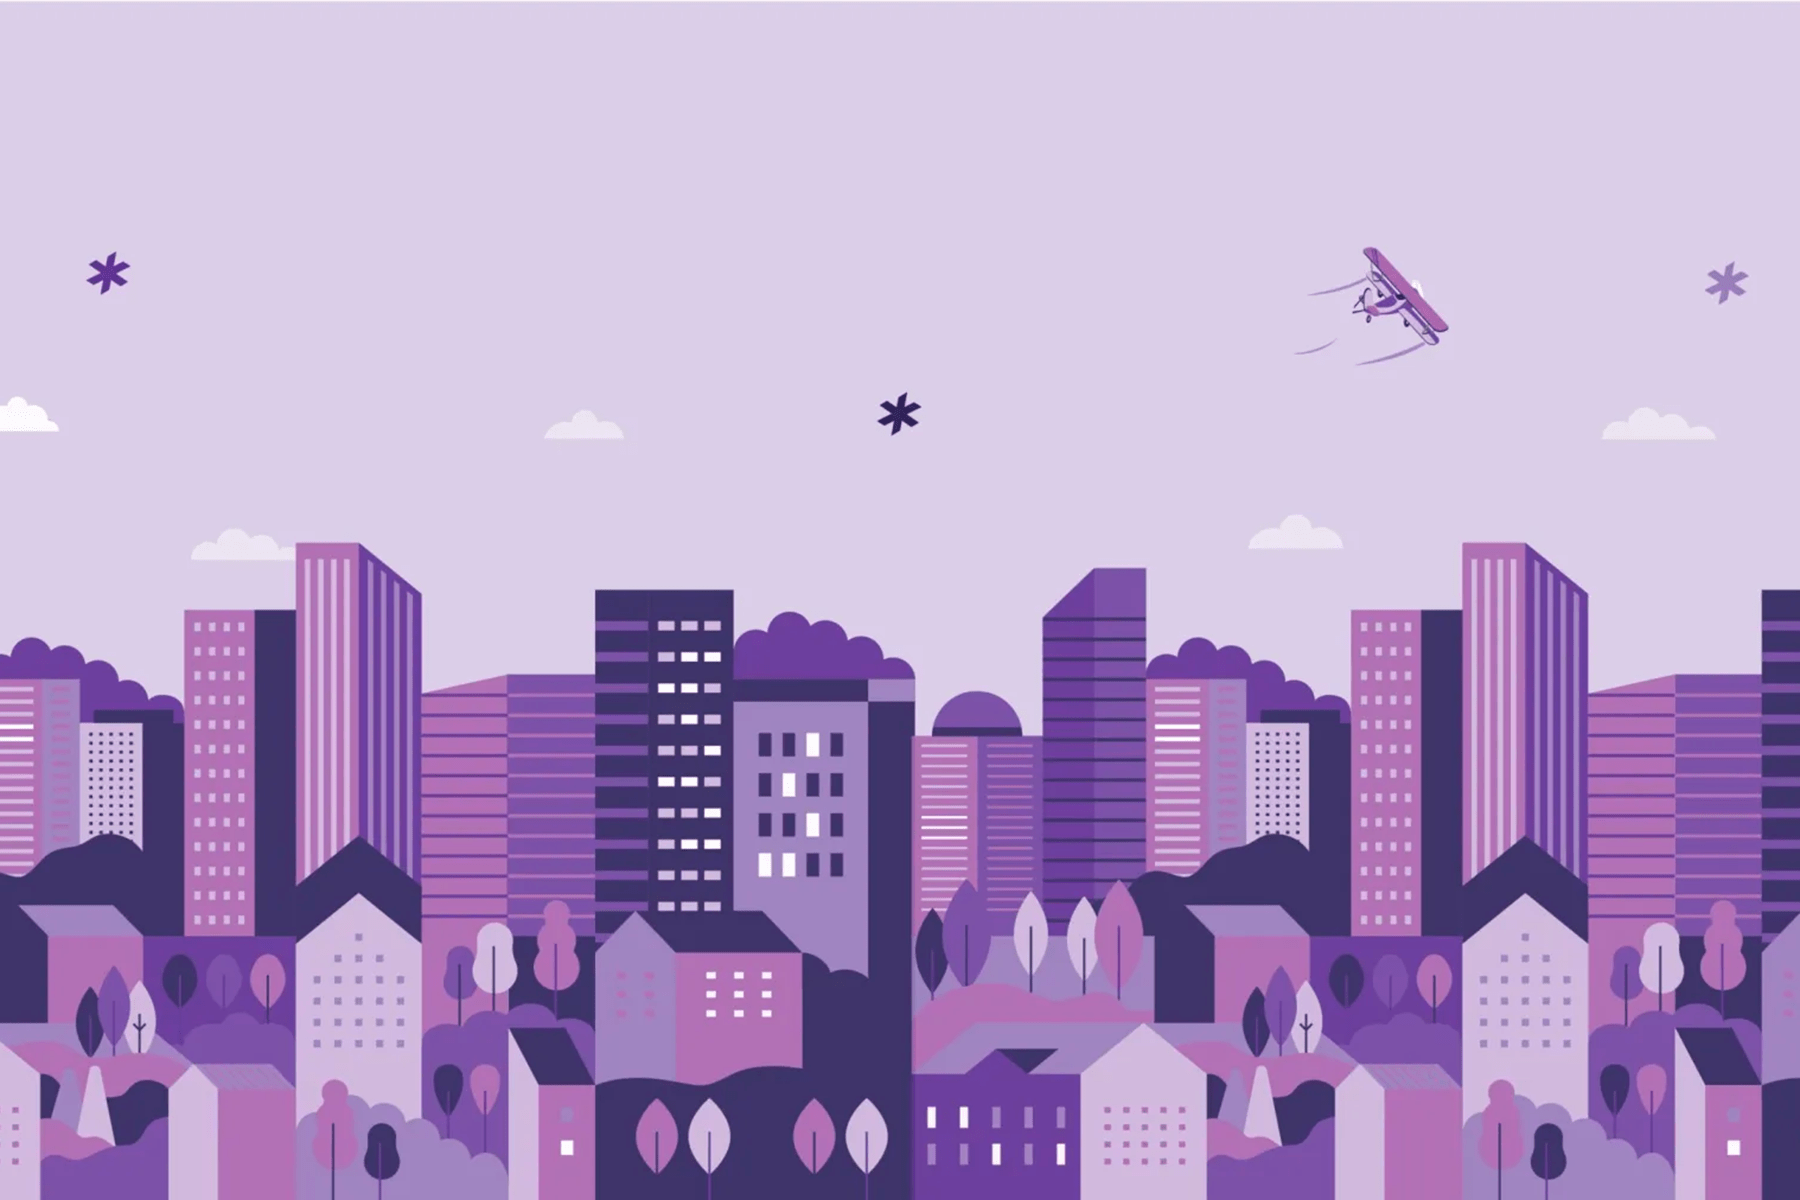 Illustration of a cityscape with asterisks dotting the sky.